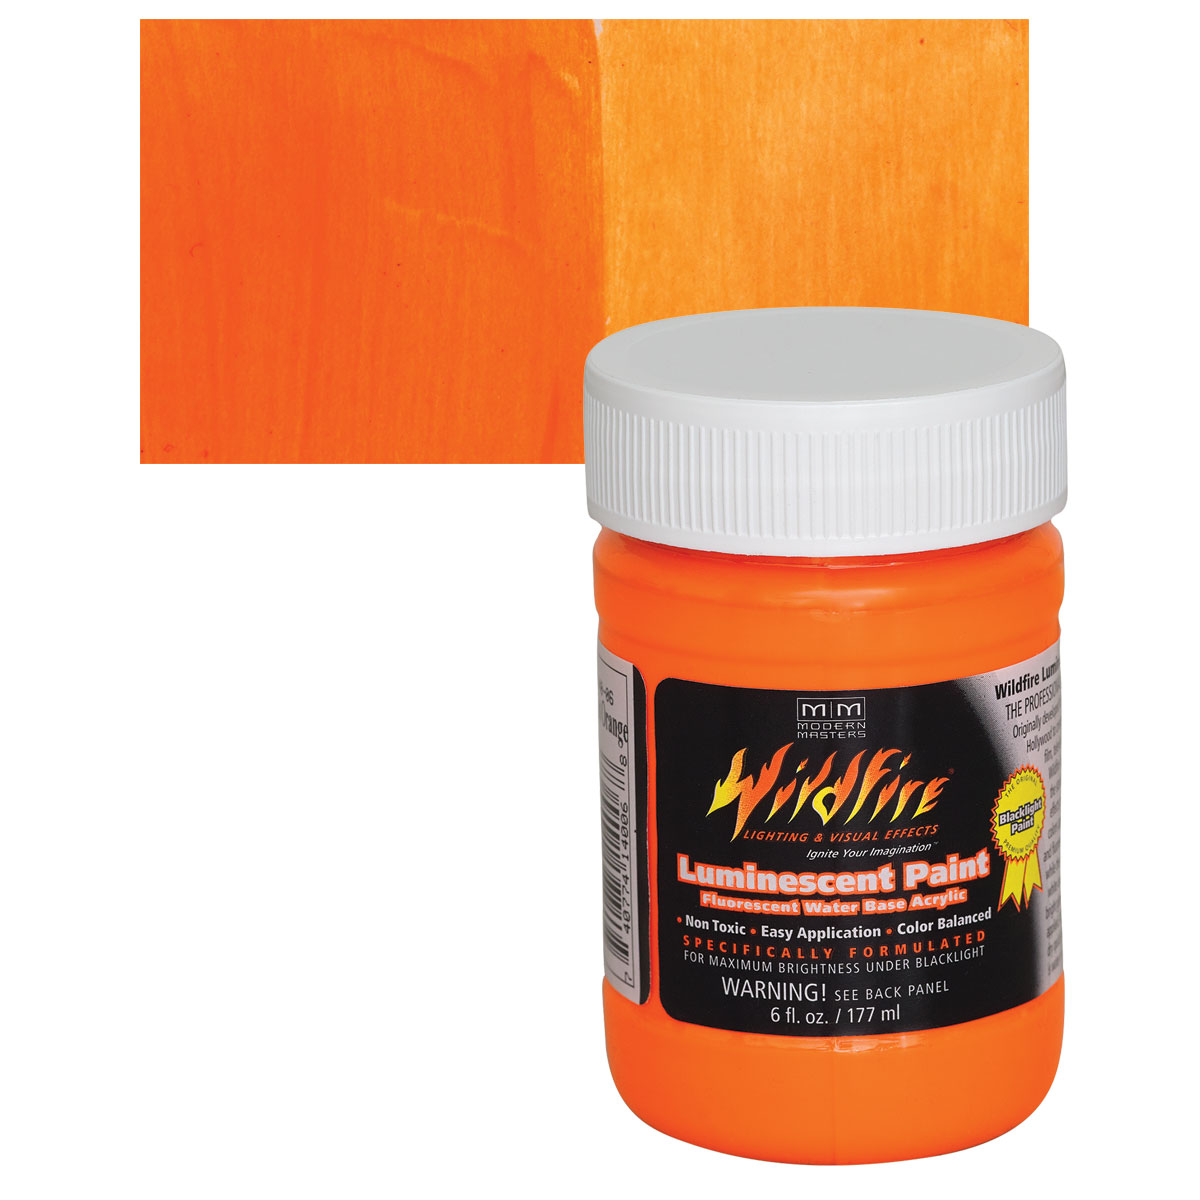 How To Make Bright Orange Color in Acrylic Paints 